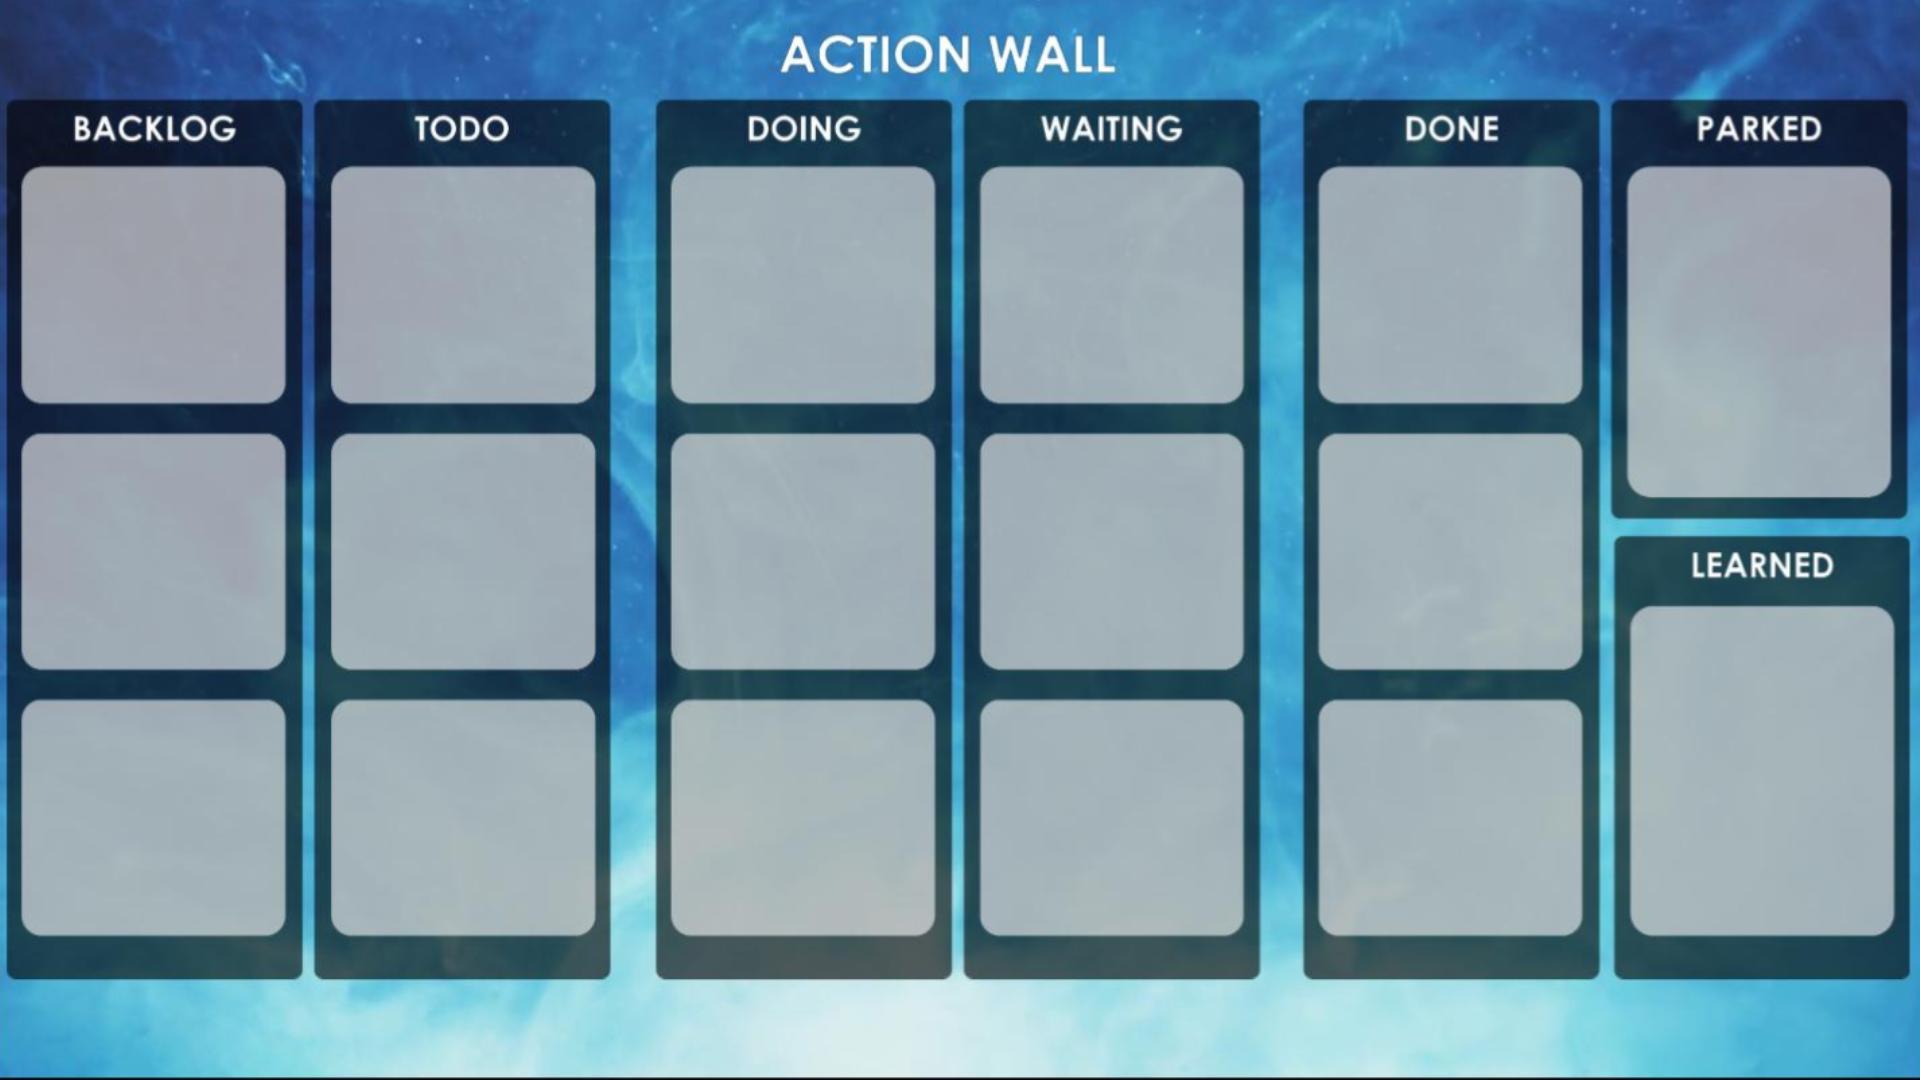 Action wall